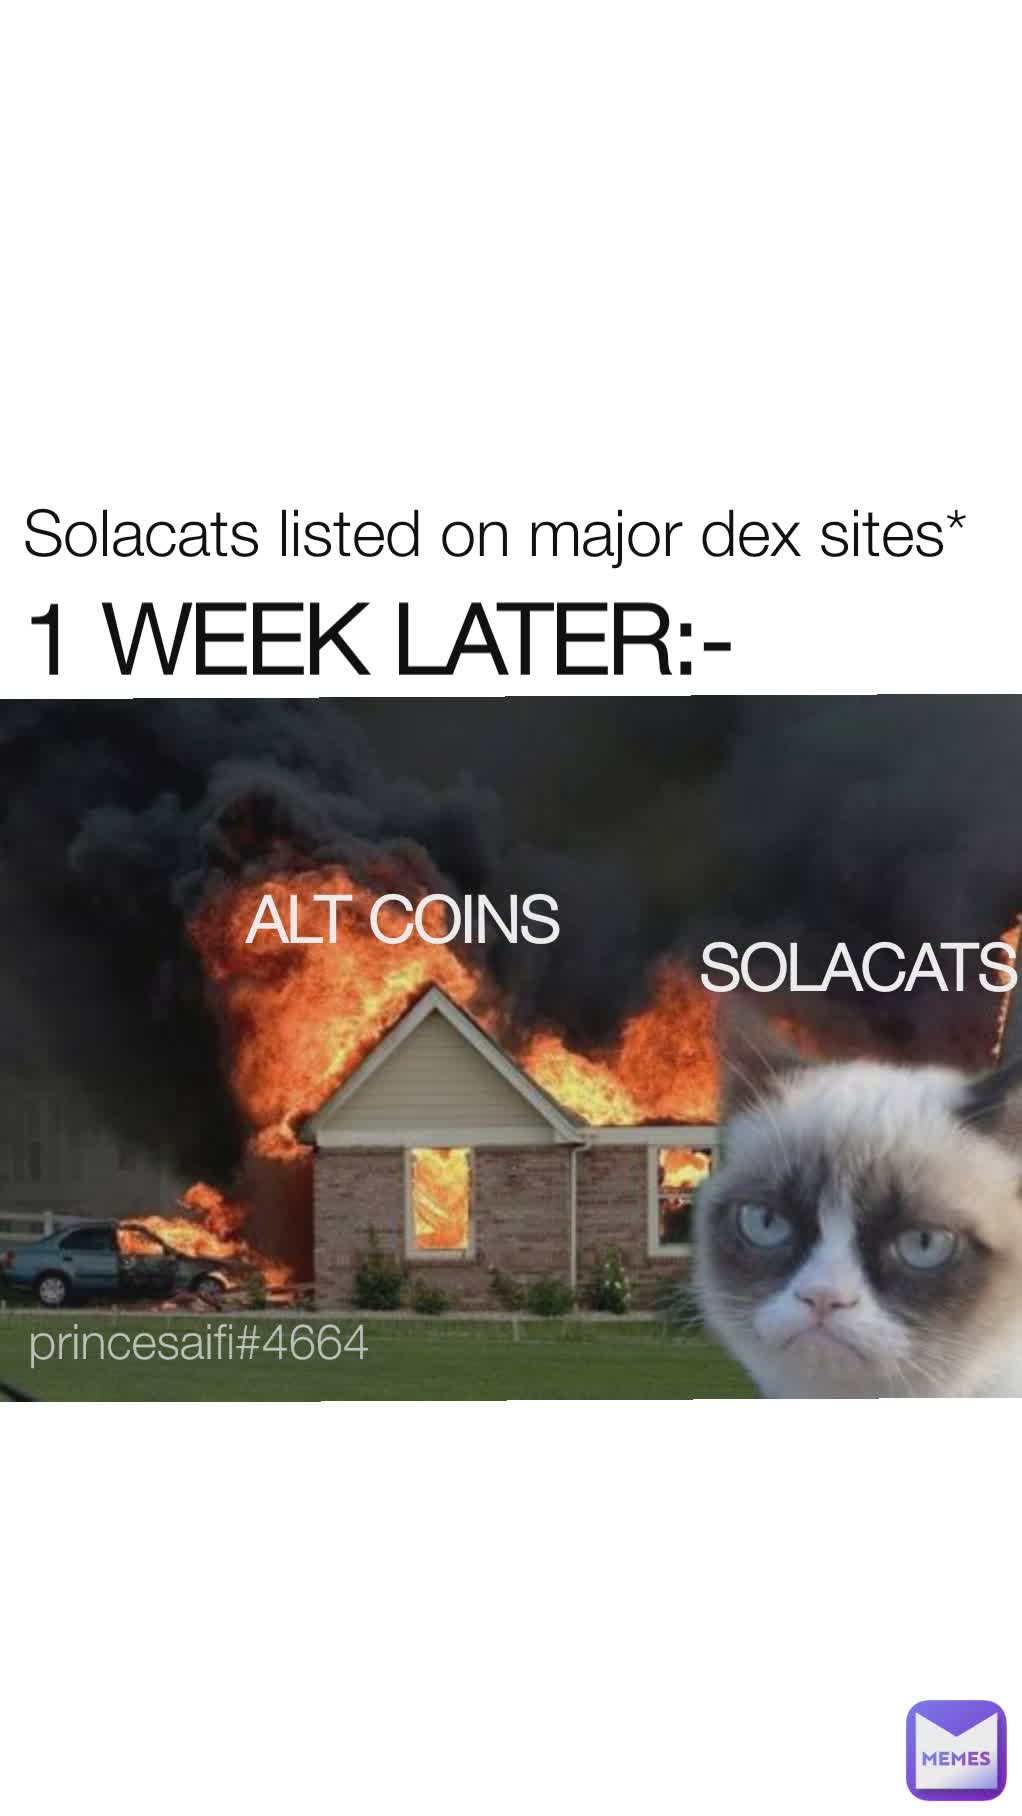 Type Text Solacats listed on major dex sites* 1 WEEK LATER:- SOLACATS ALT COINS princesaifi#4664